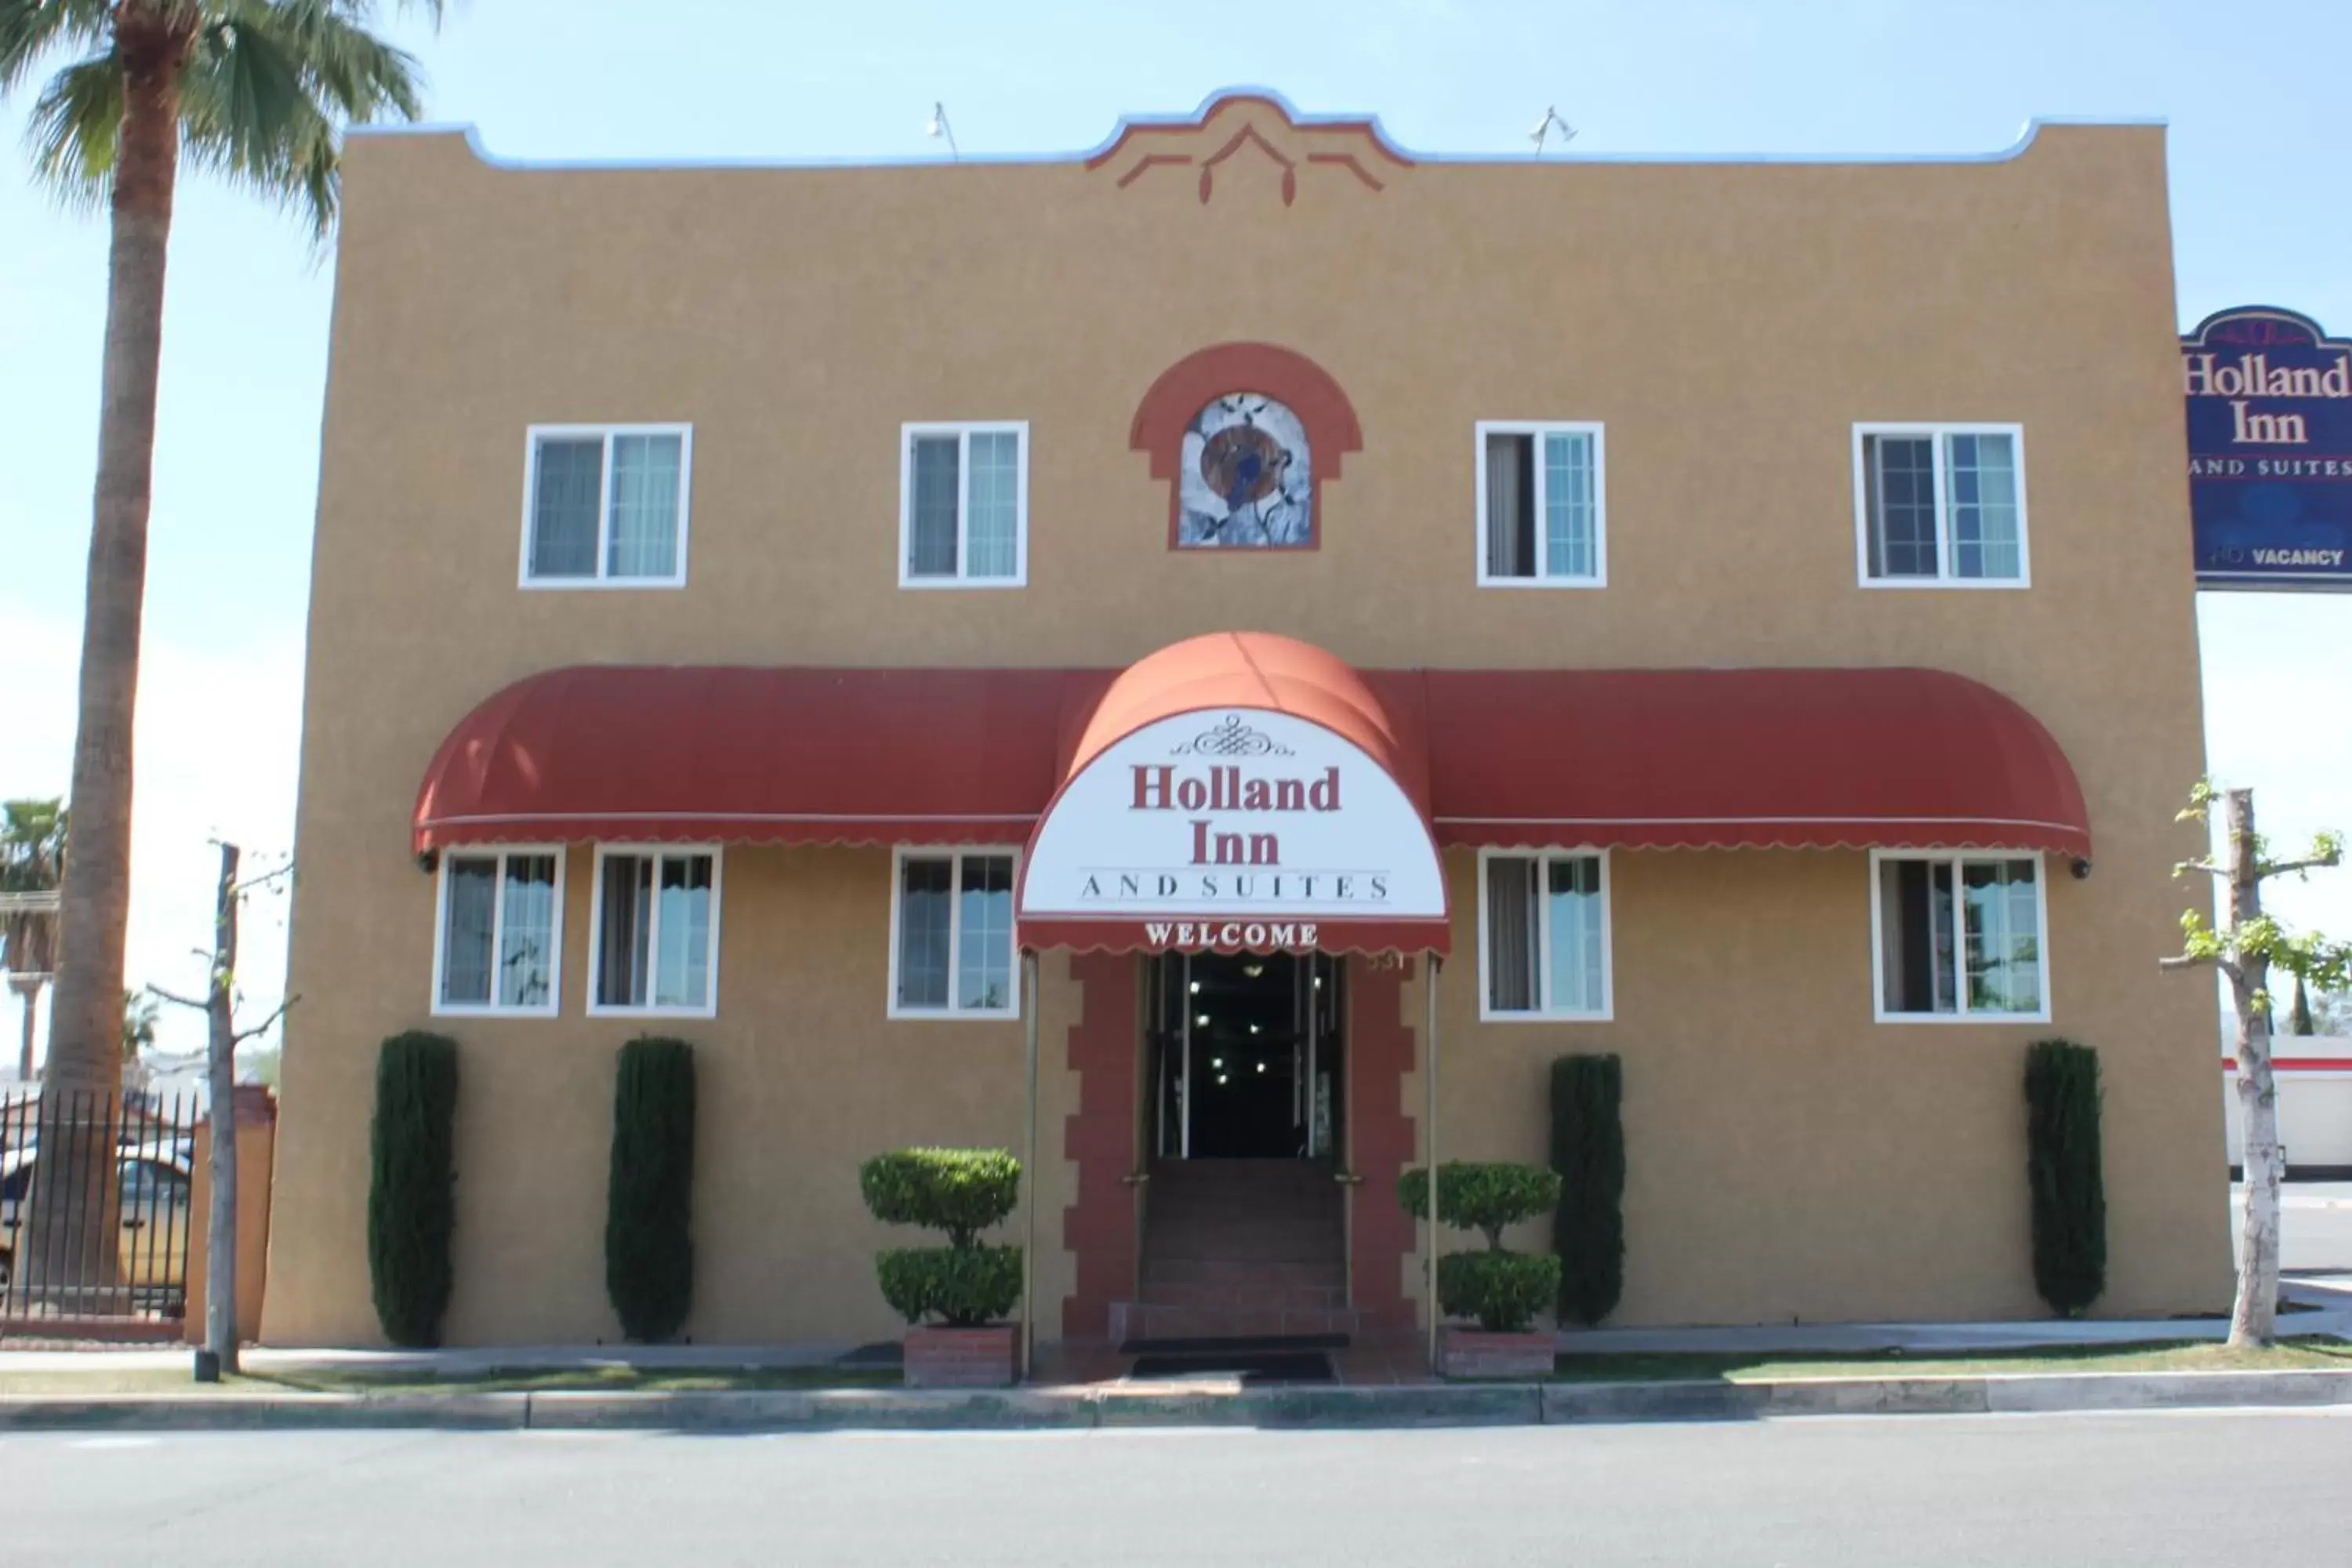 Property Building in Holland Inn and Suites